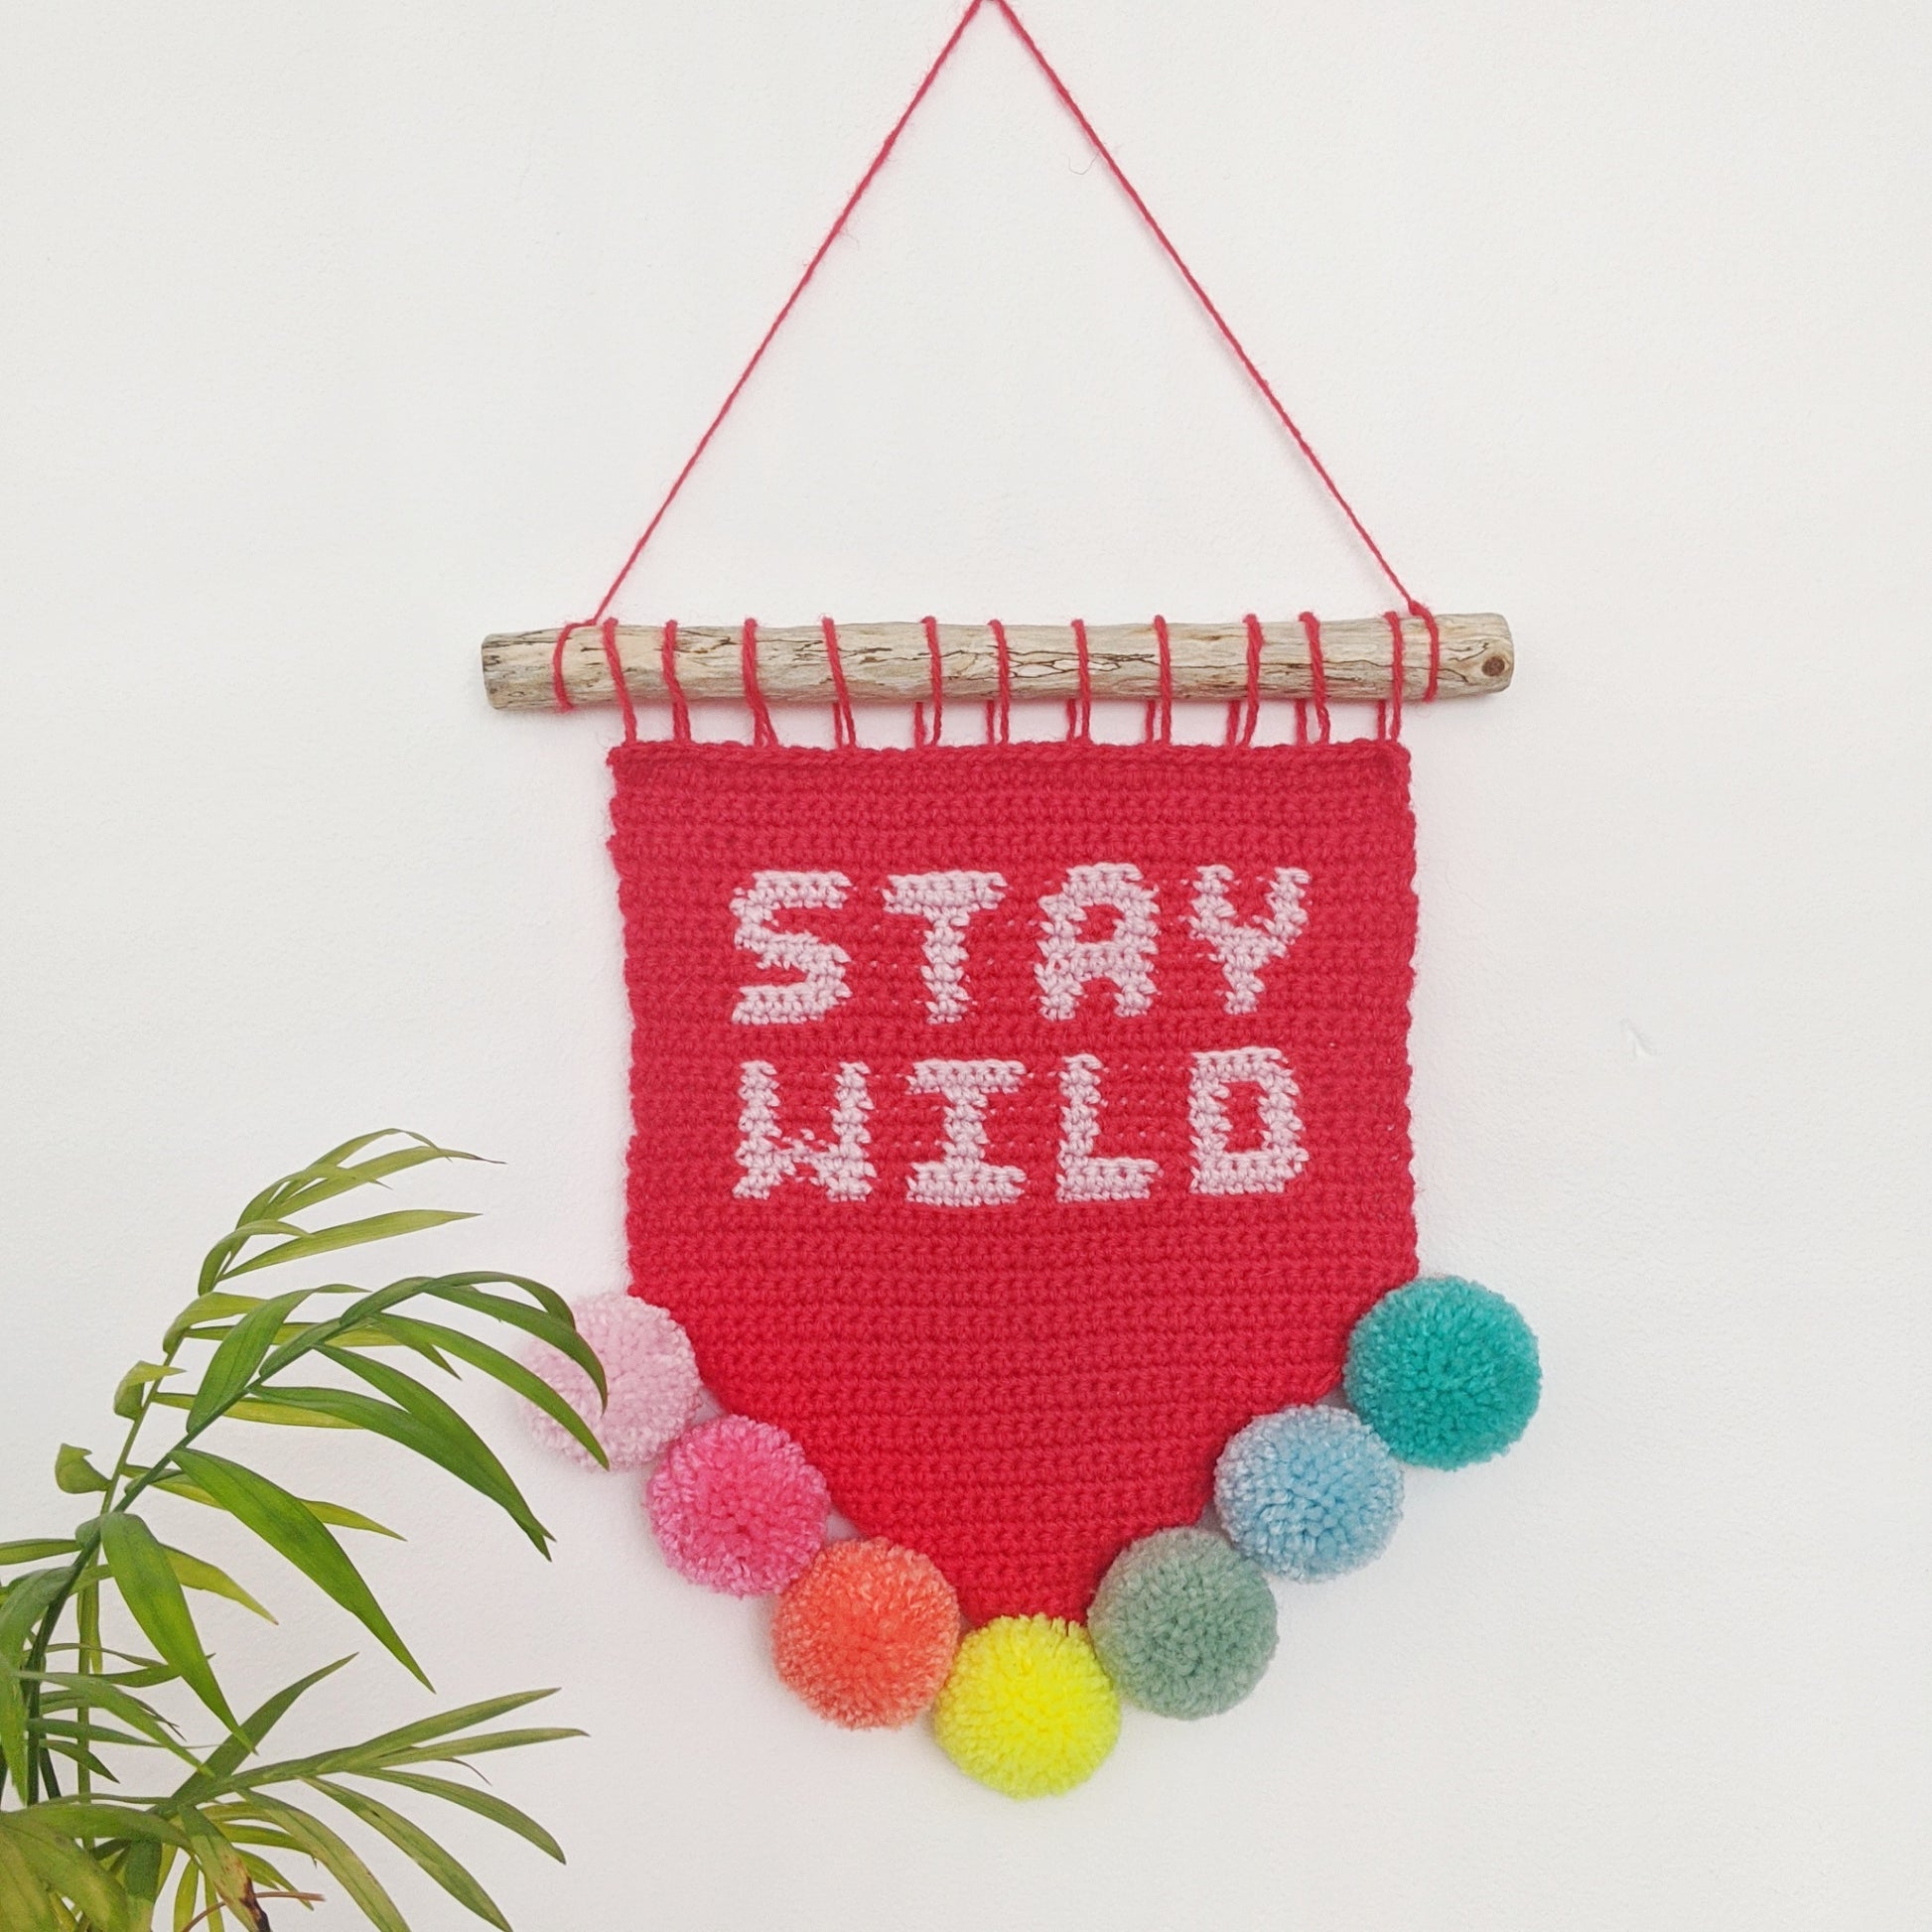 Stay Wild wall hanging